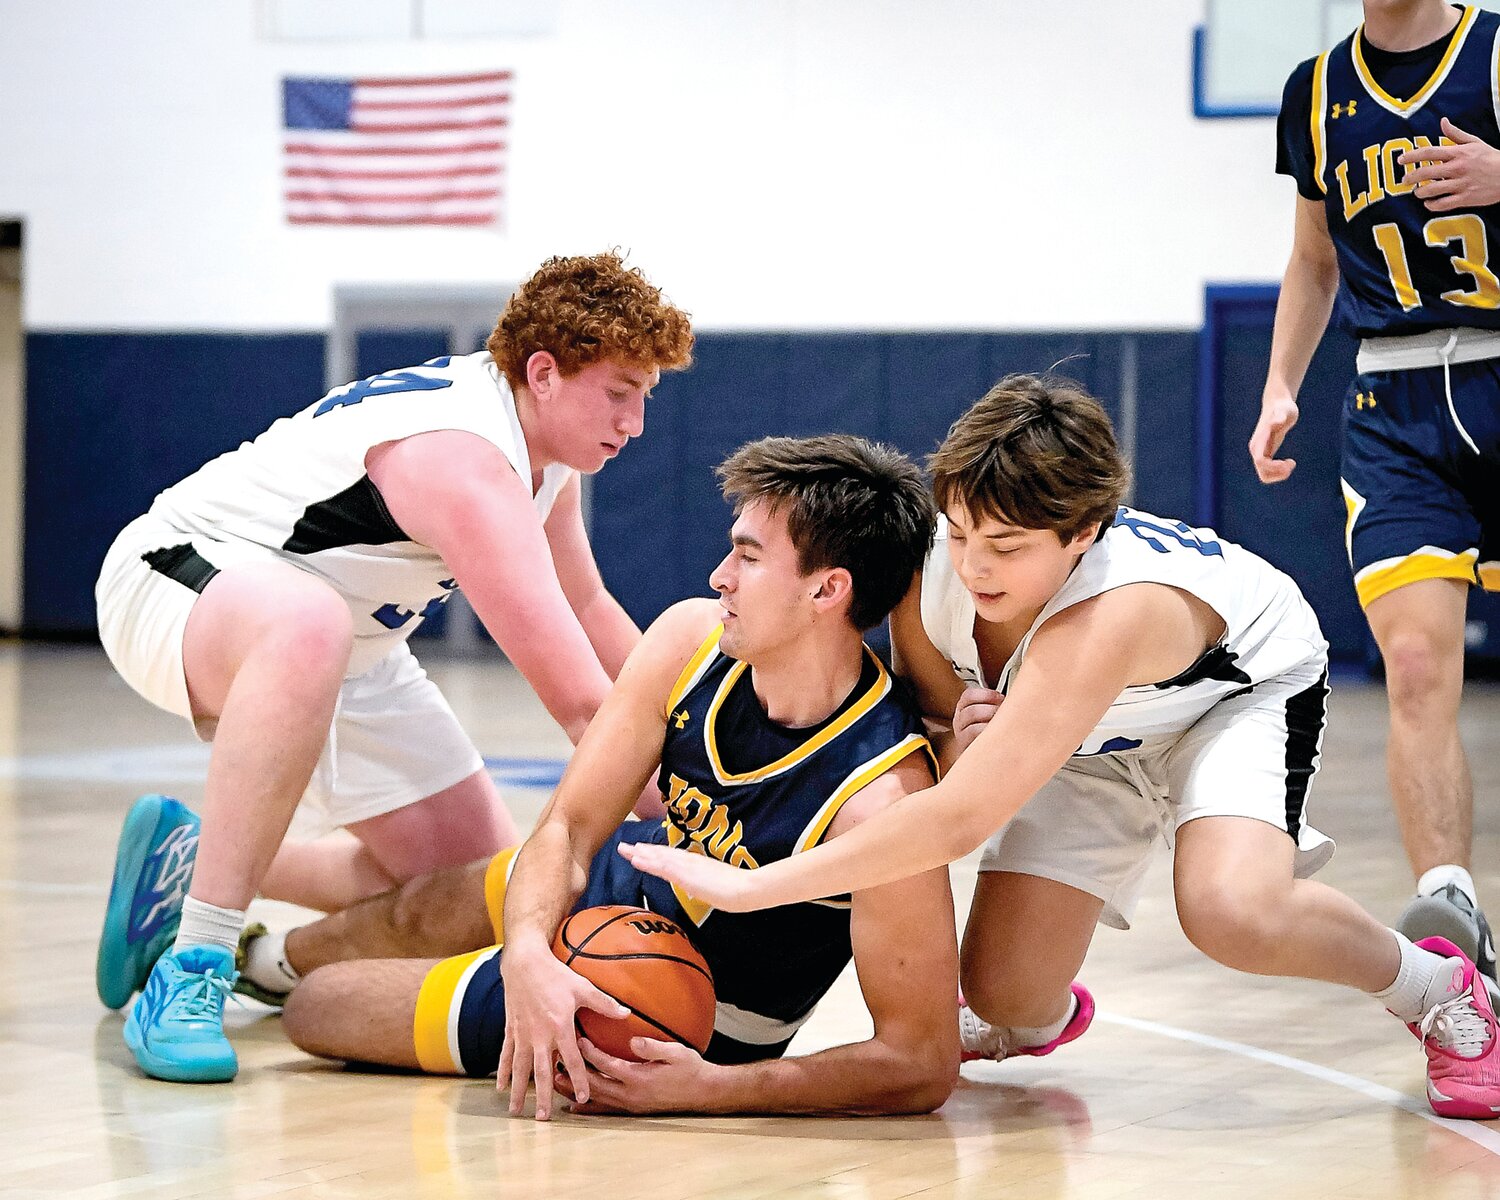 New Hope-Solebury’s Dylan Fitzgerald dives to gather a loose ball in between Jack M. Barrack Hebrew Academy’s Jonah Thomas and Max Shapiro.